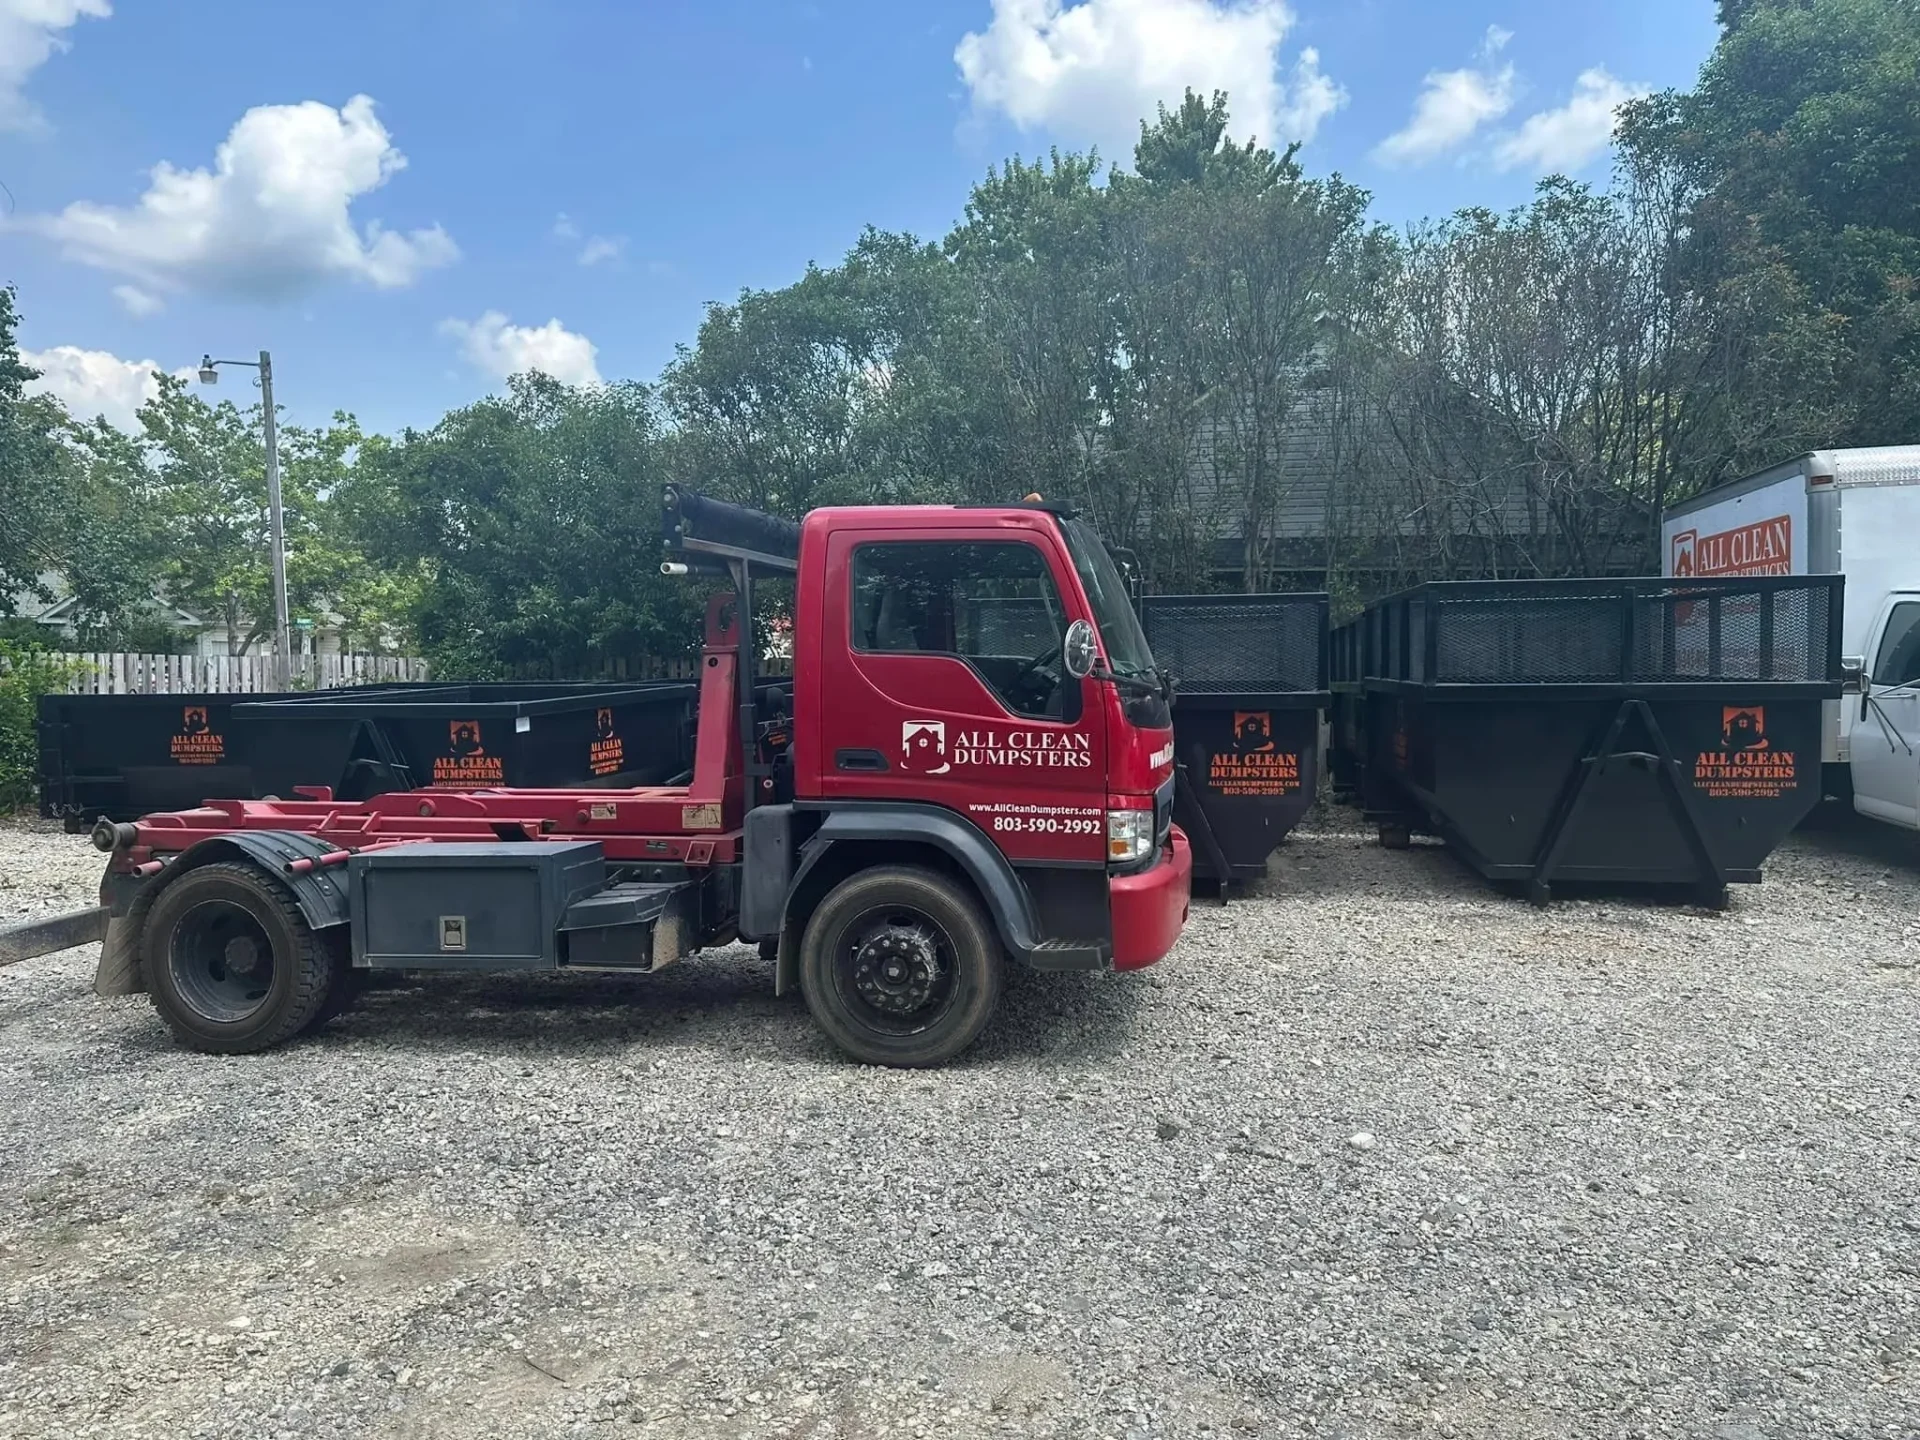 A red truck parked in the gravel next to a dumpster.